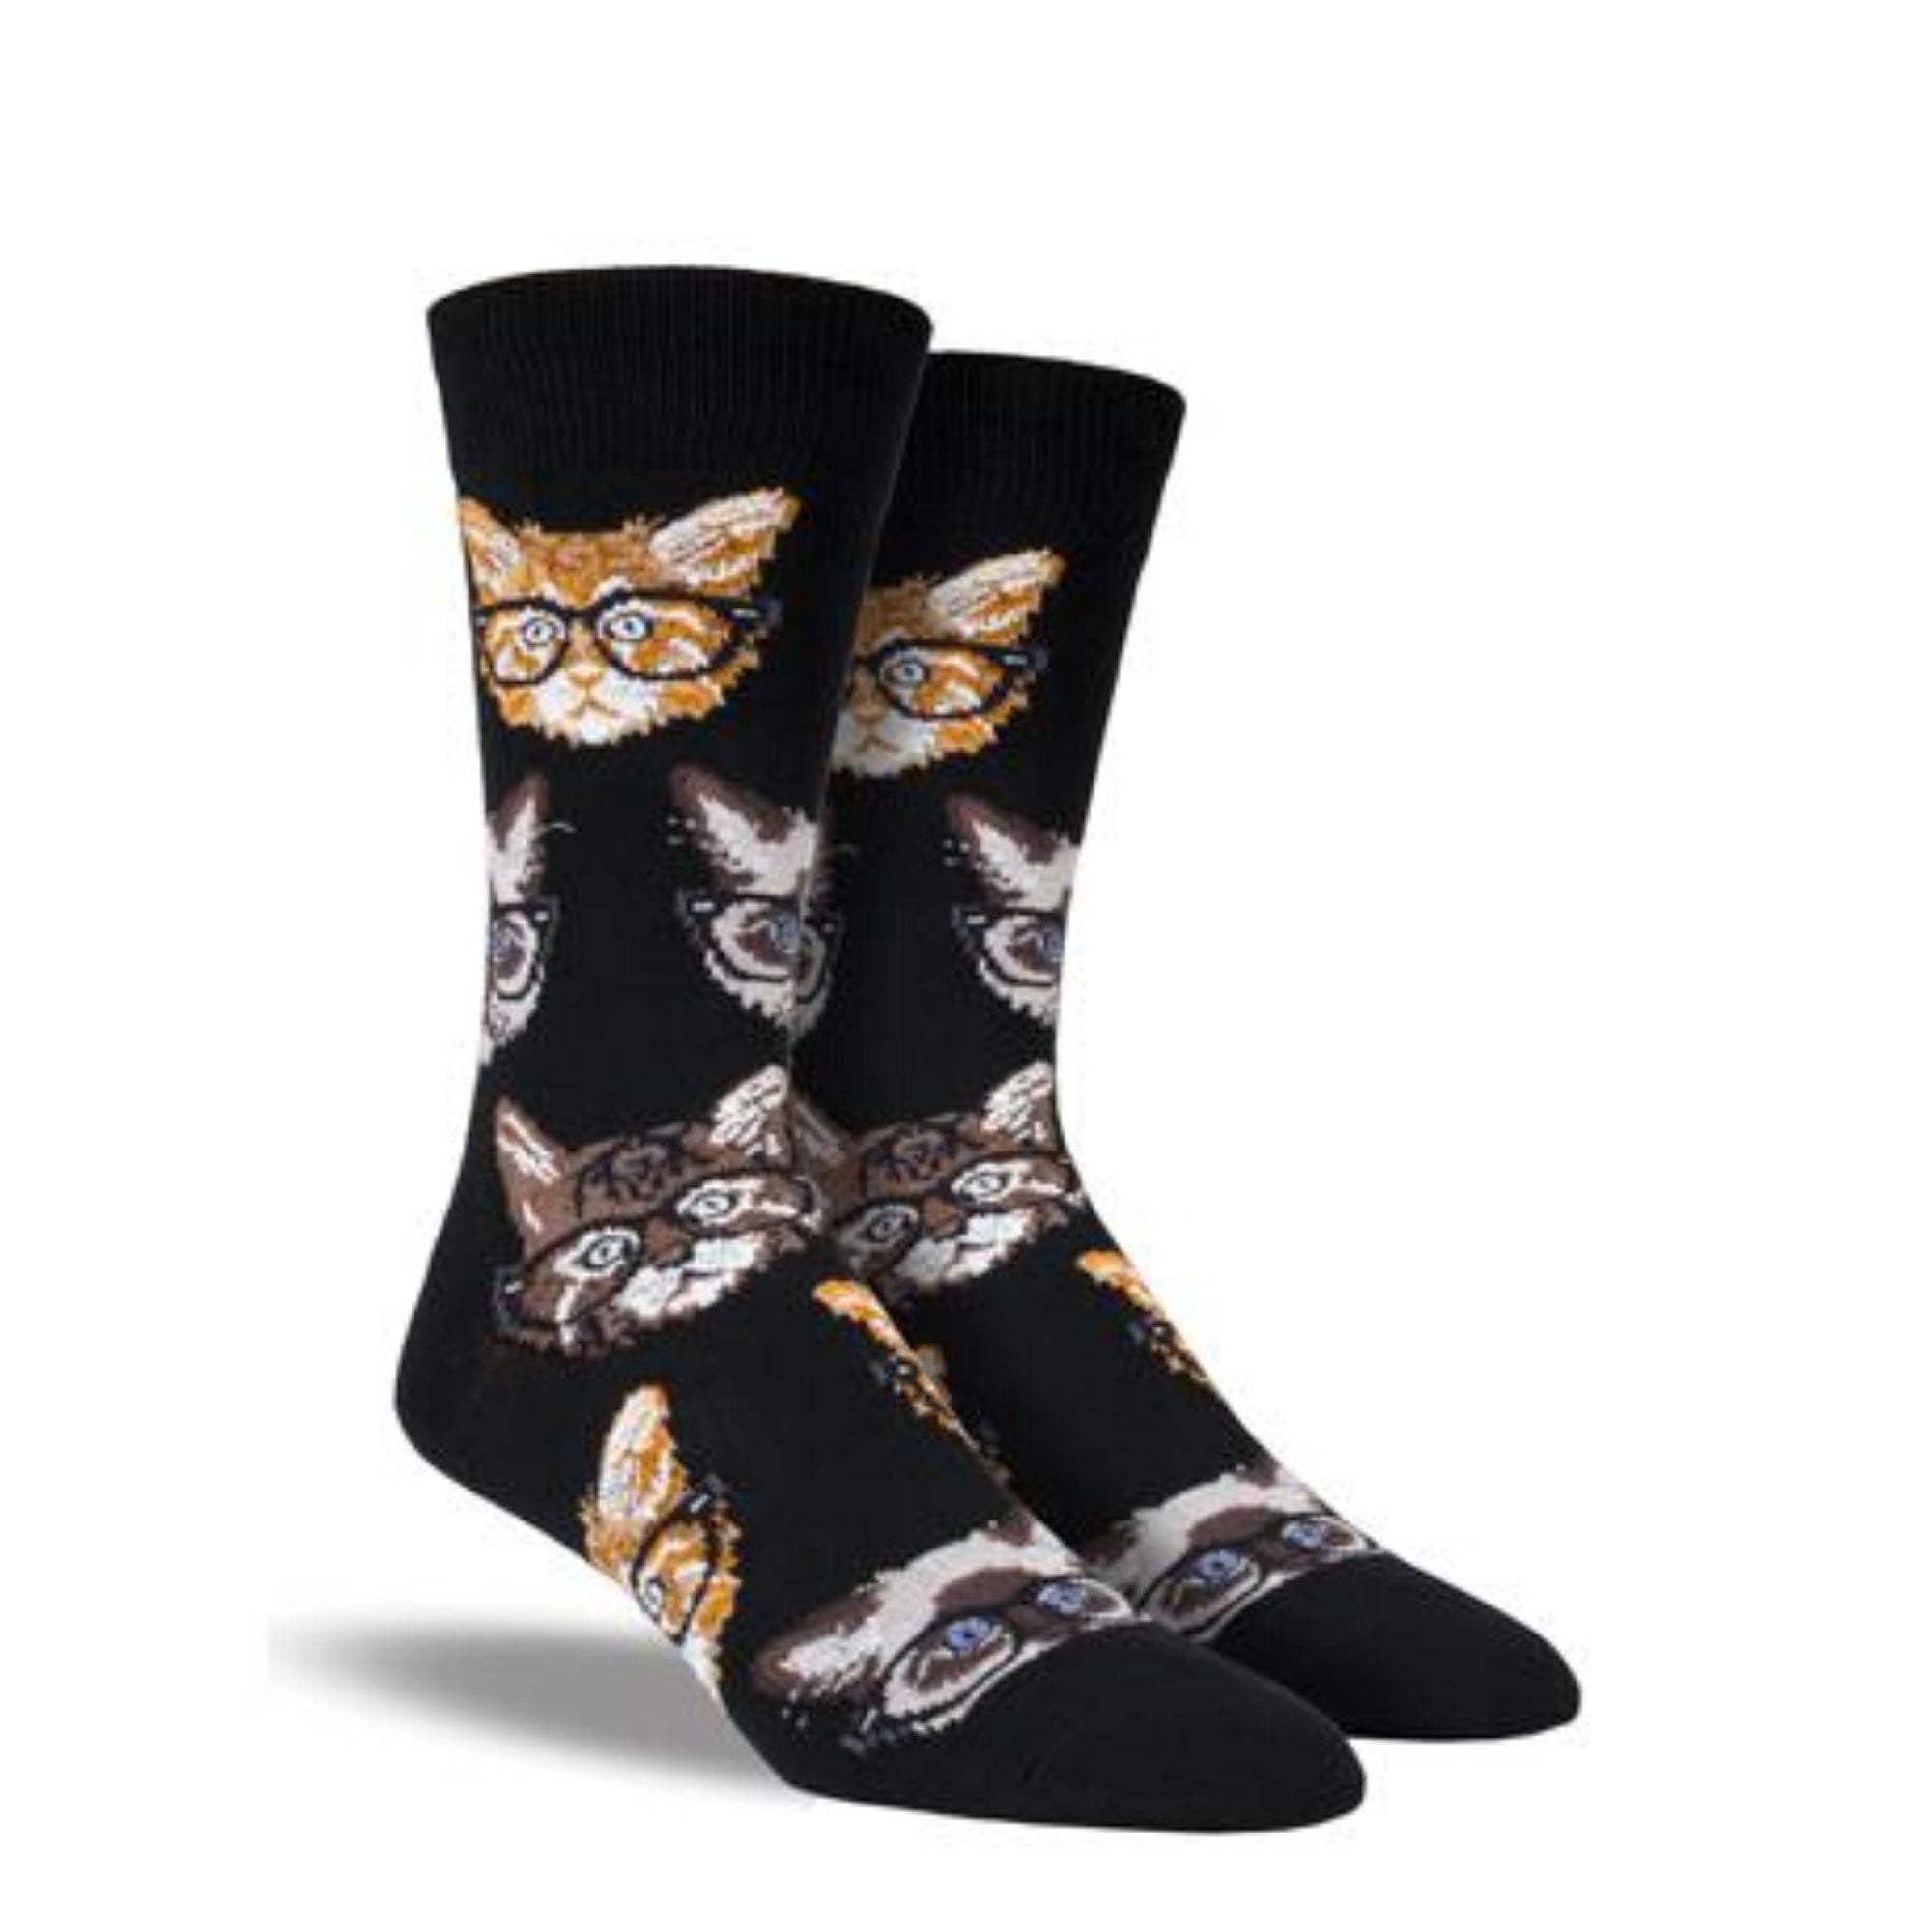 A pair of men&#39;s black crew socks with cat faces wearing glasses. 